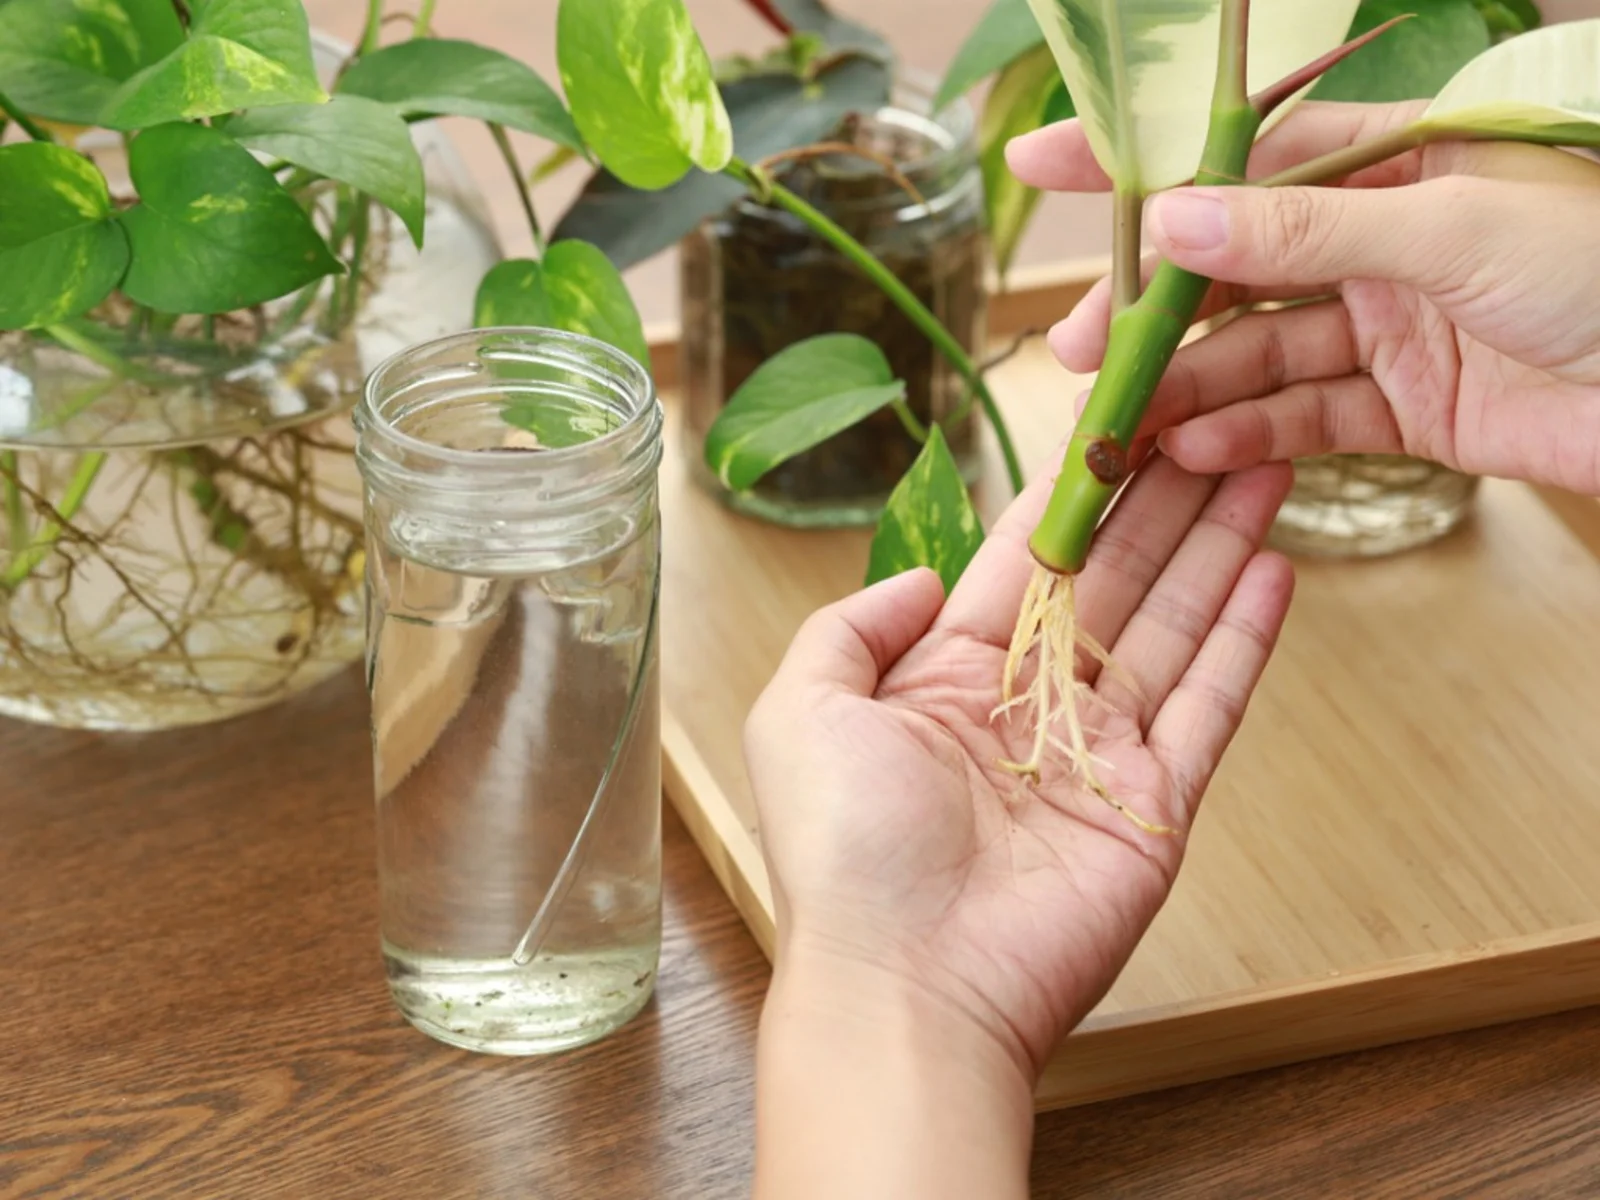 How Long Should Roots Be Before Planting